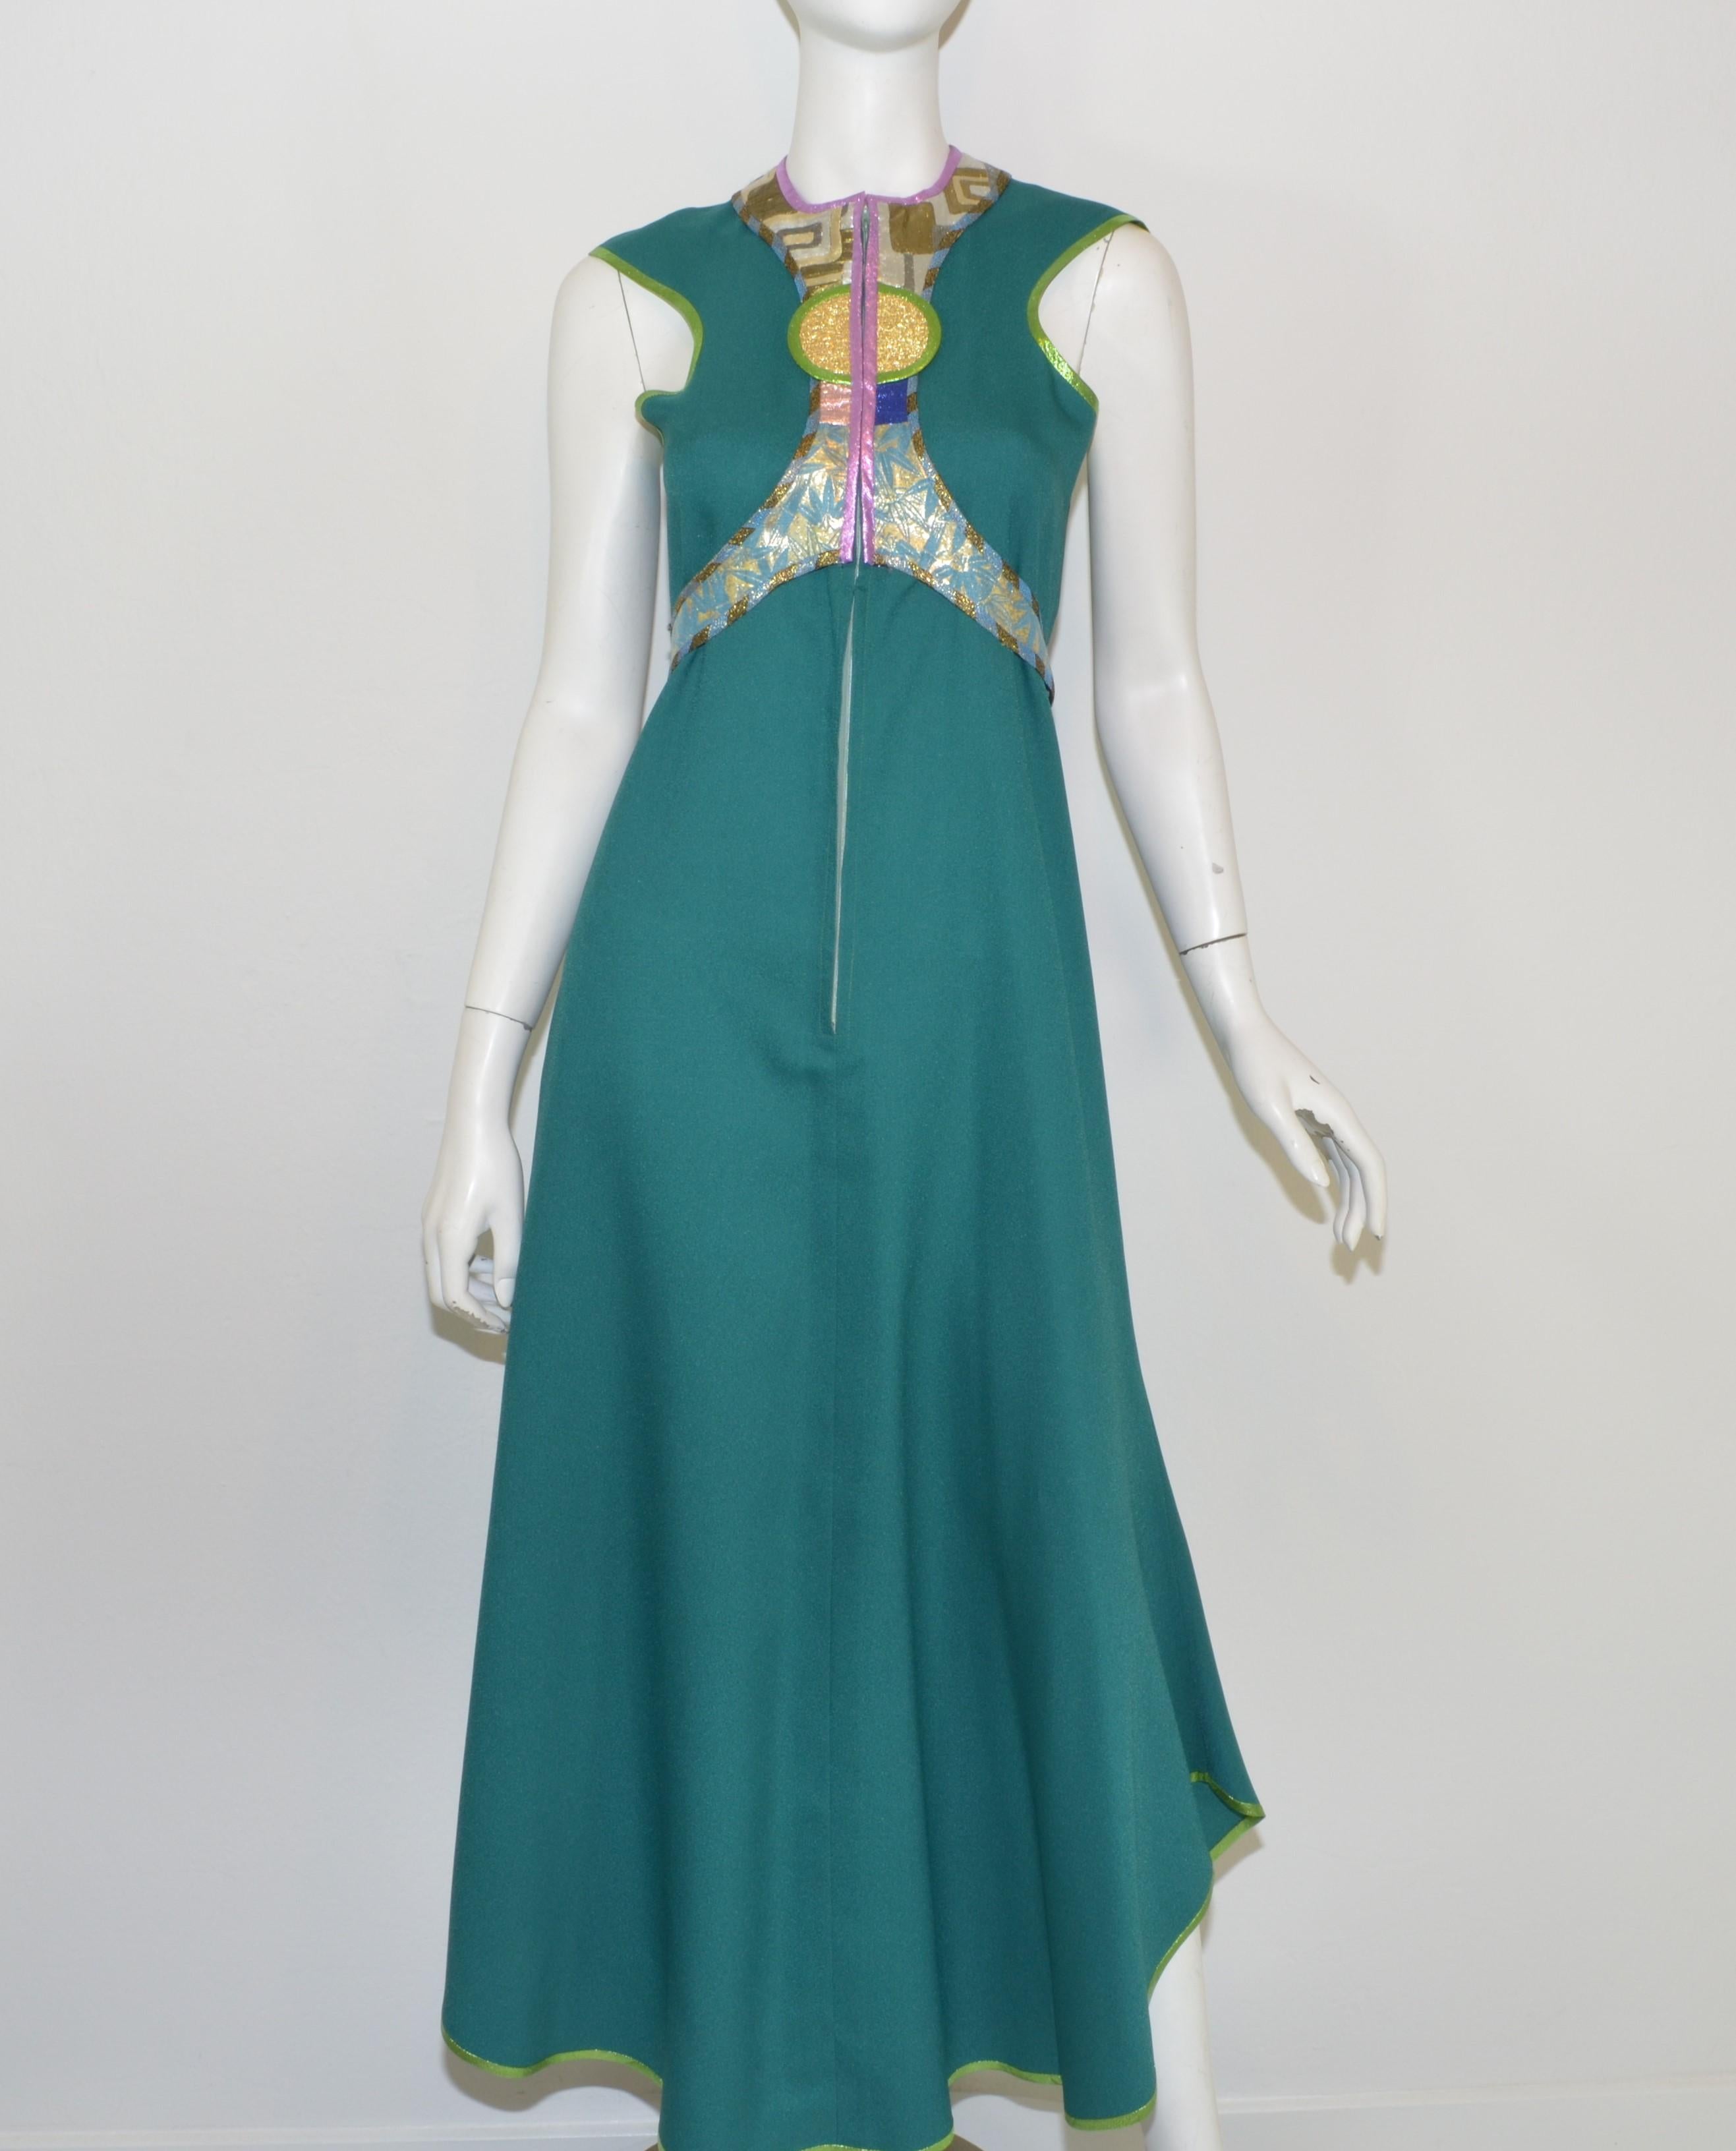 Kaisik Wong Teal Ensemble with Jacket & Dress -- Dress is featured in a teal blue with a metallic lame design along the bust and neckline and a front zipper closure. Jacket has a multicolored lame design along the opening and around the hem with